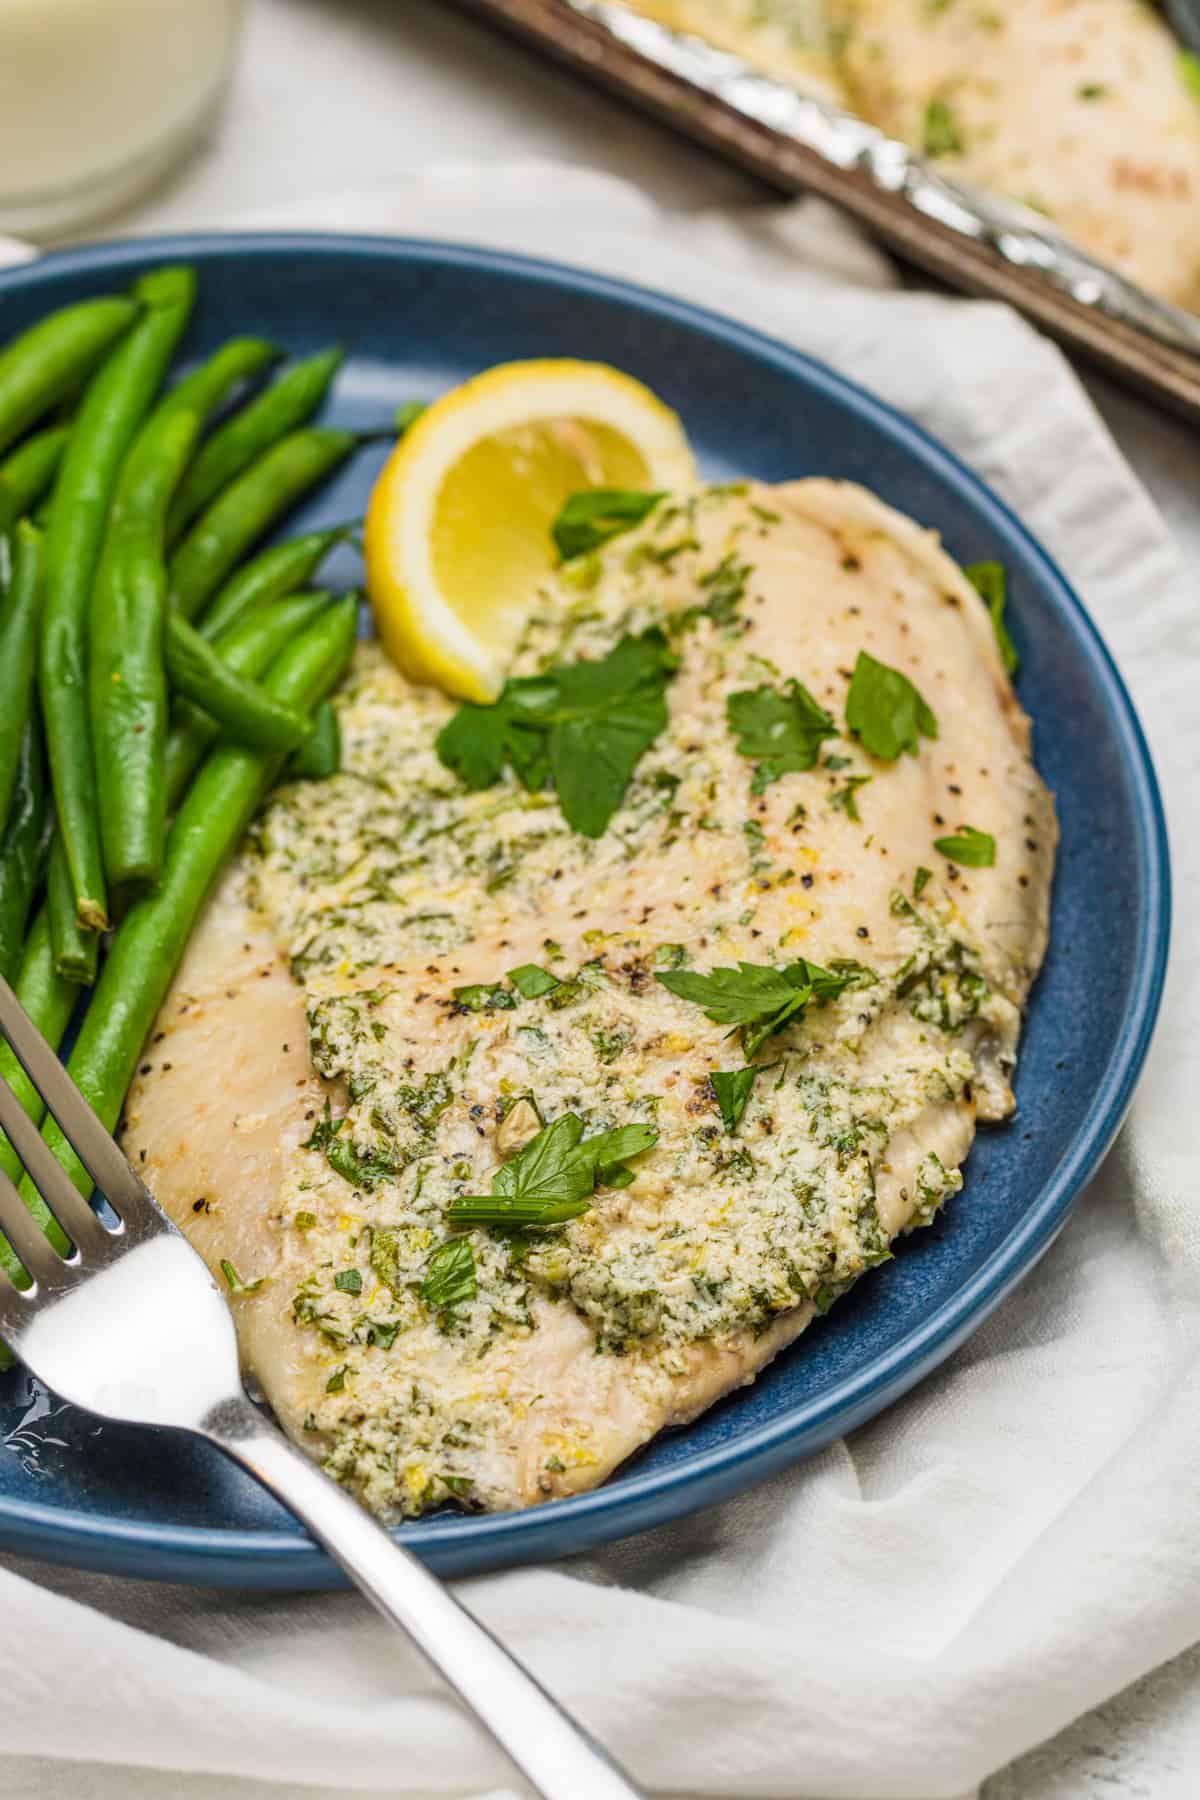 Parmesan Broiled Tilapia on a blue plate with long green beans and a fork.